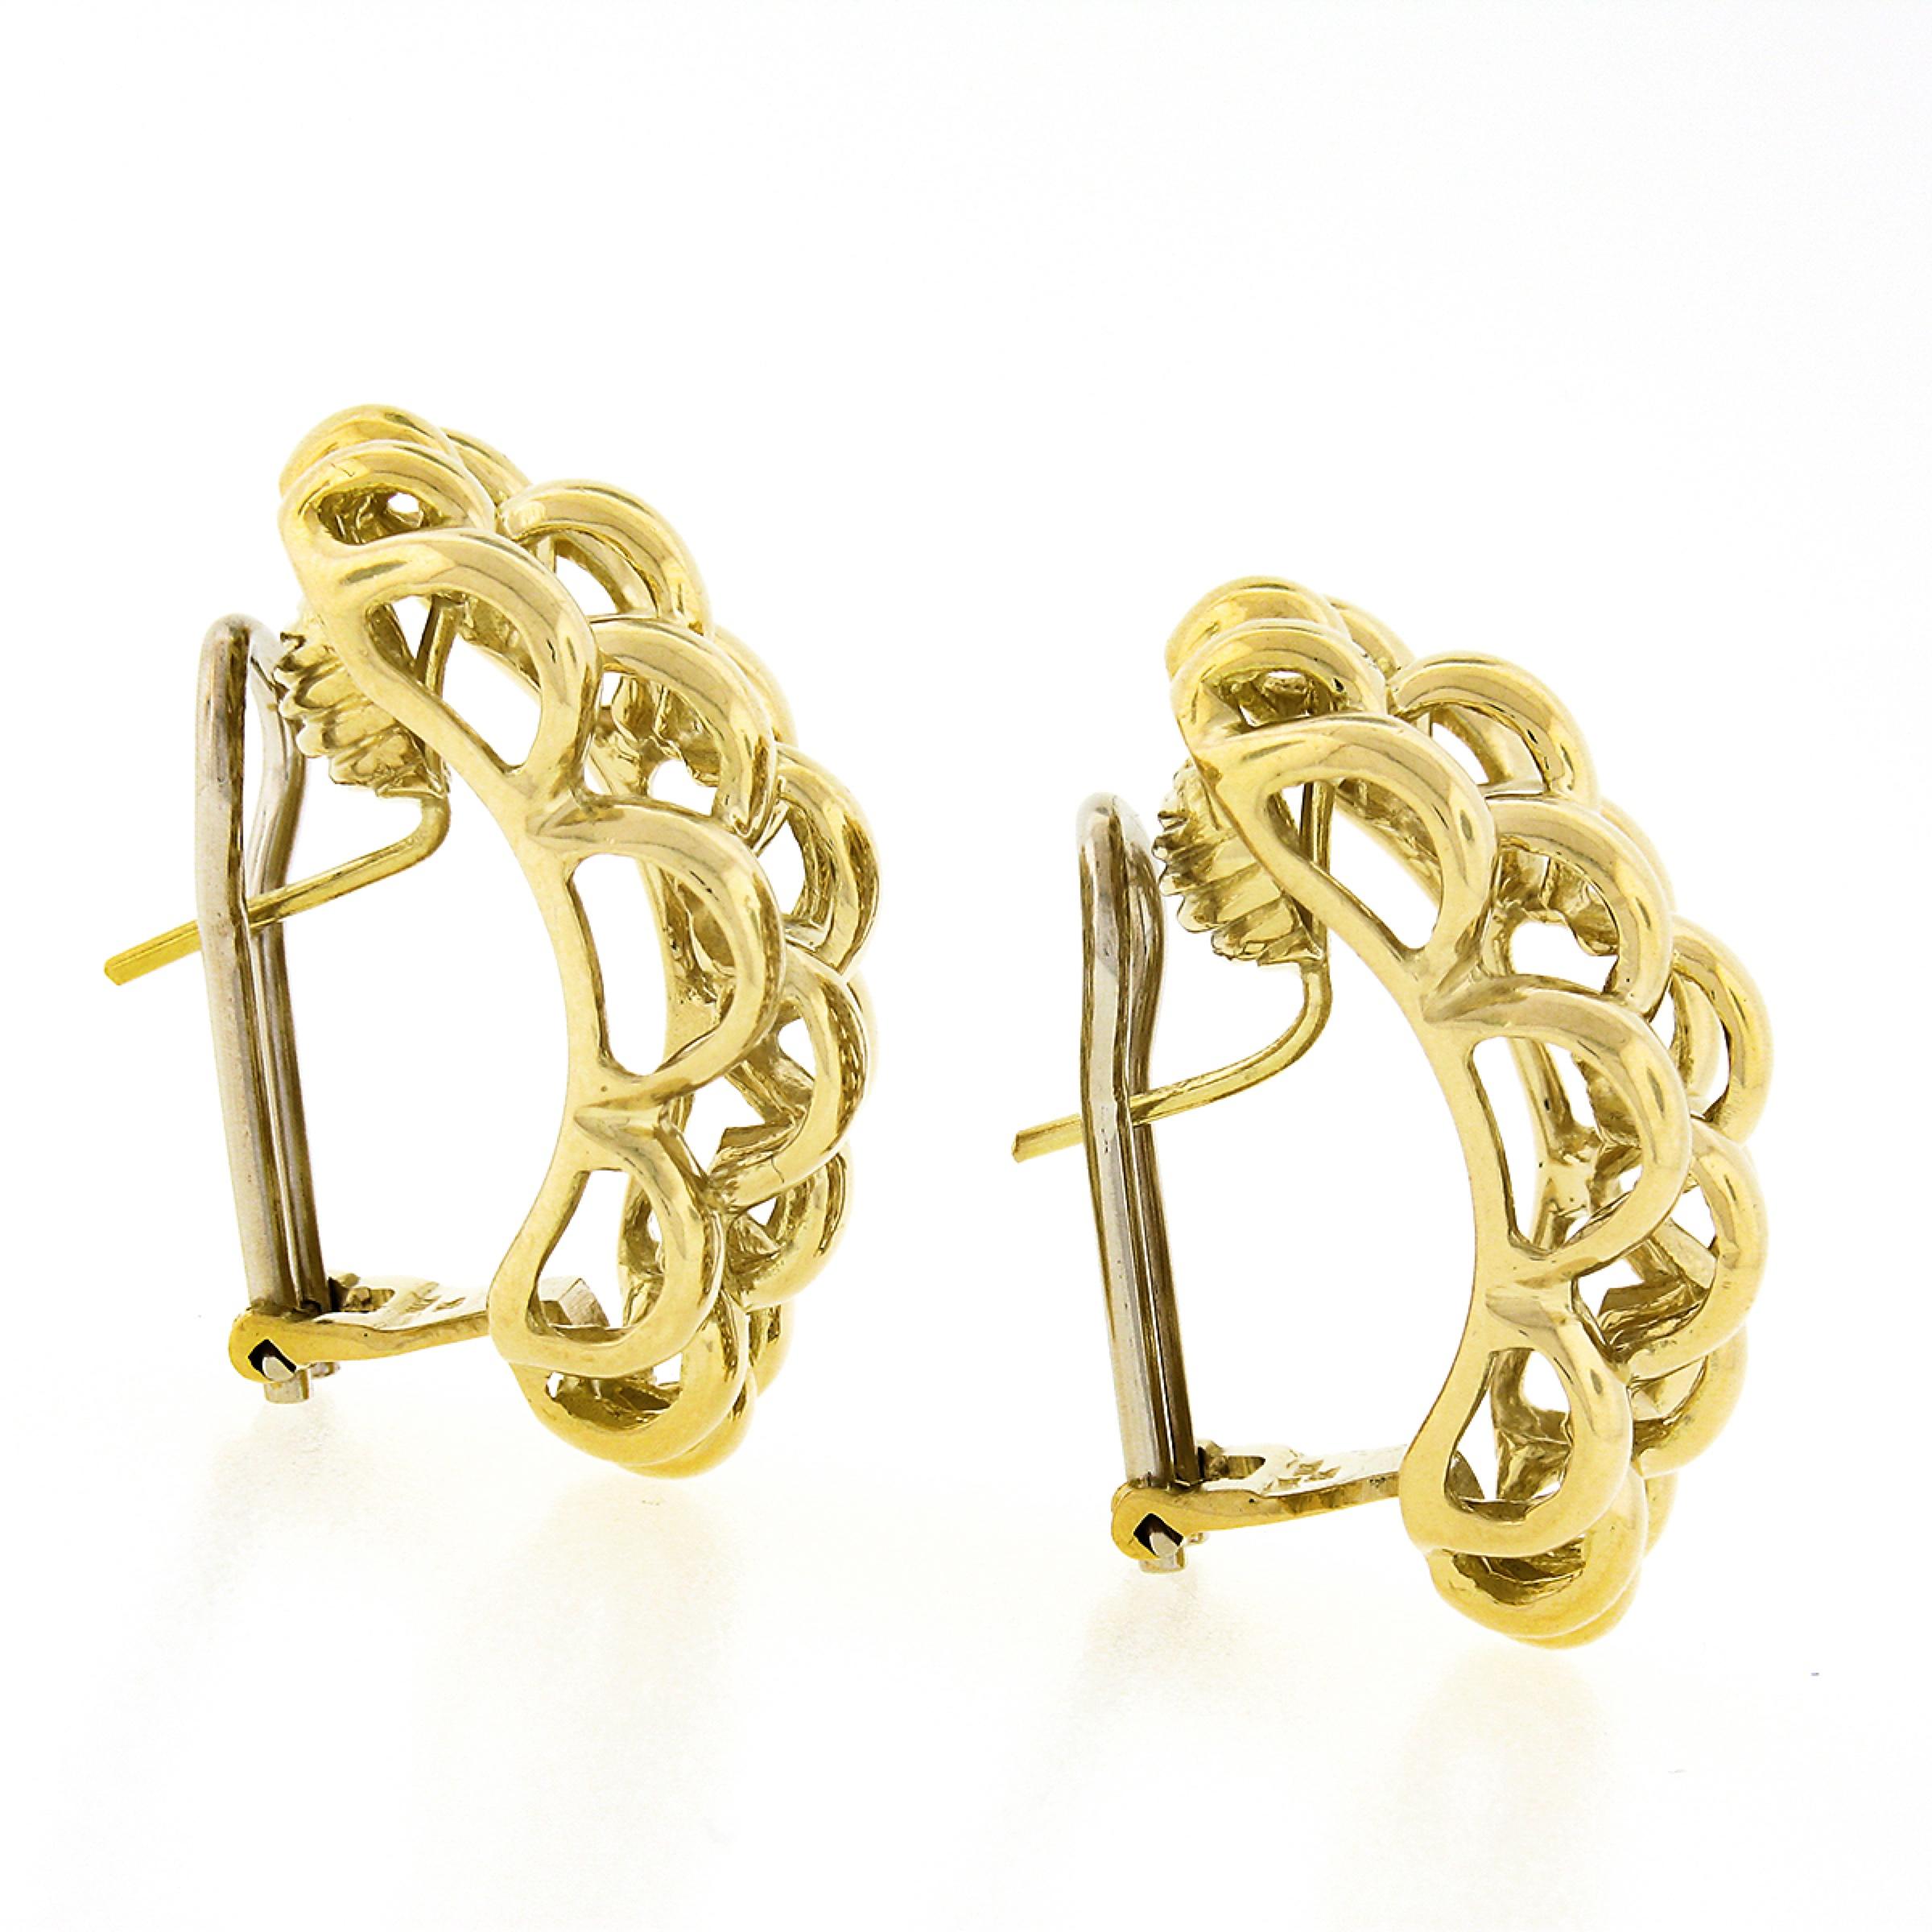 These large cuff earrings are very well crafted in solid 18k yellow gold and feature a wide panther style design with a nice high polished finish throughout. These earrings look absolutely elegant on the ear and will perfectly complete your day or